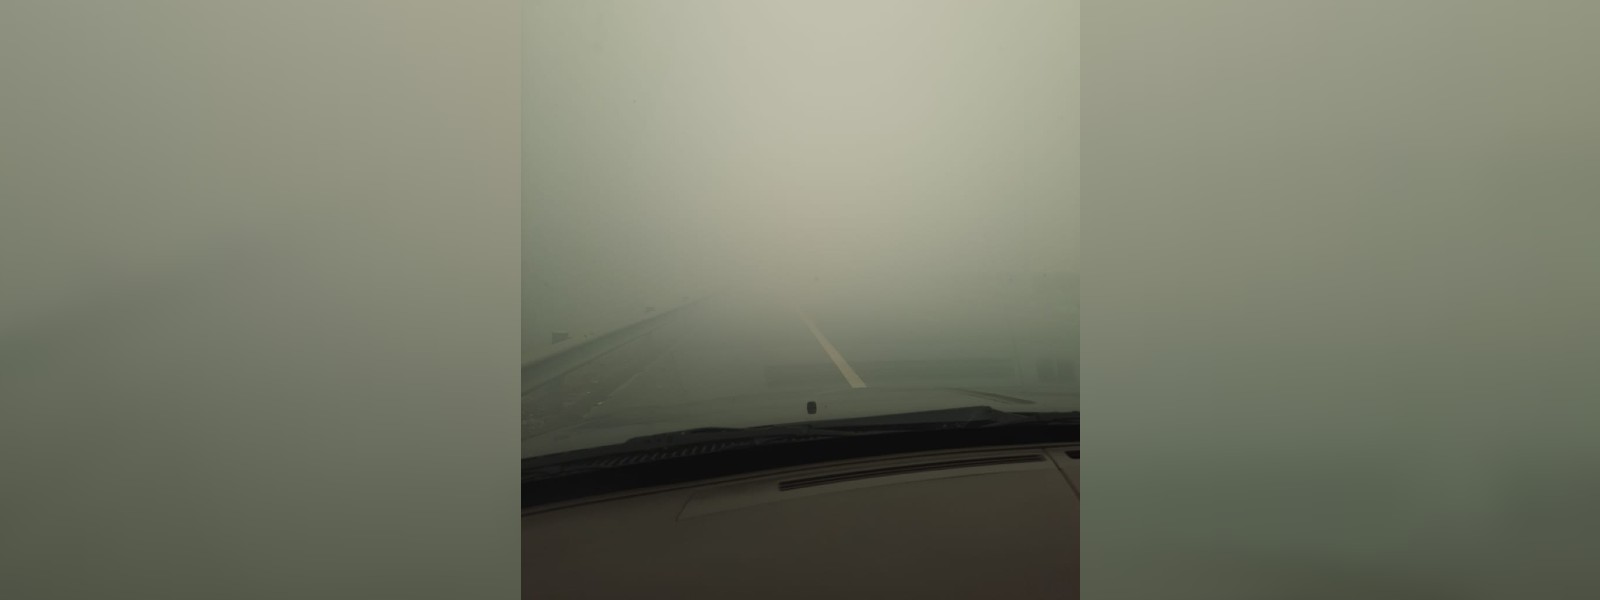 UPDATE : Airport highway closed due to poor visibility